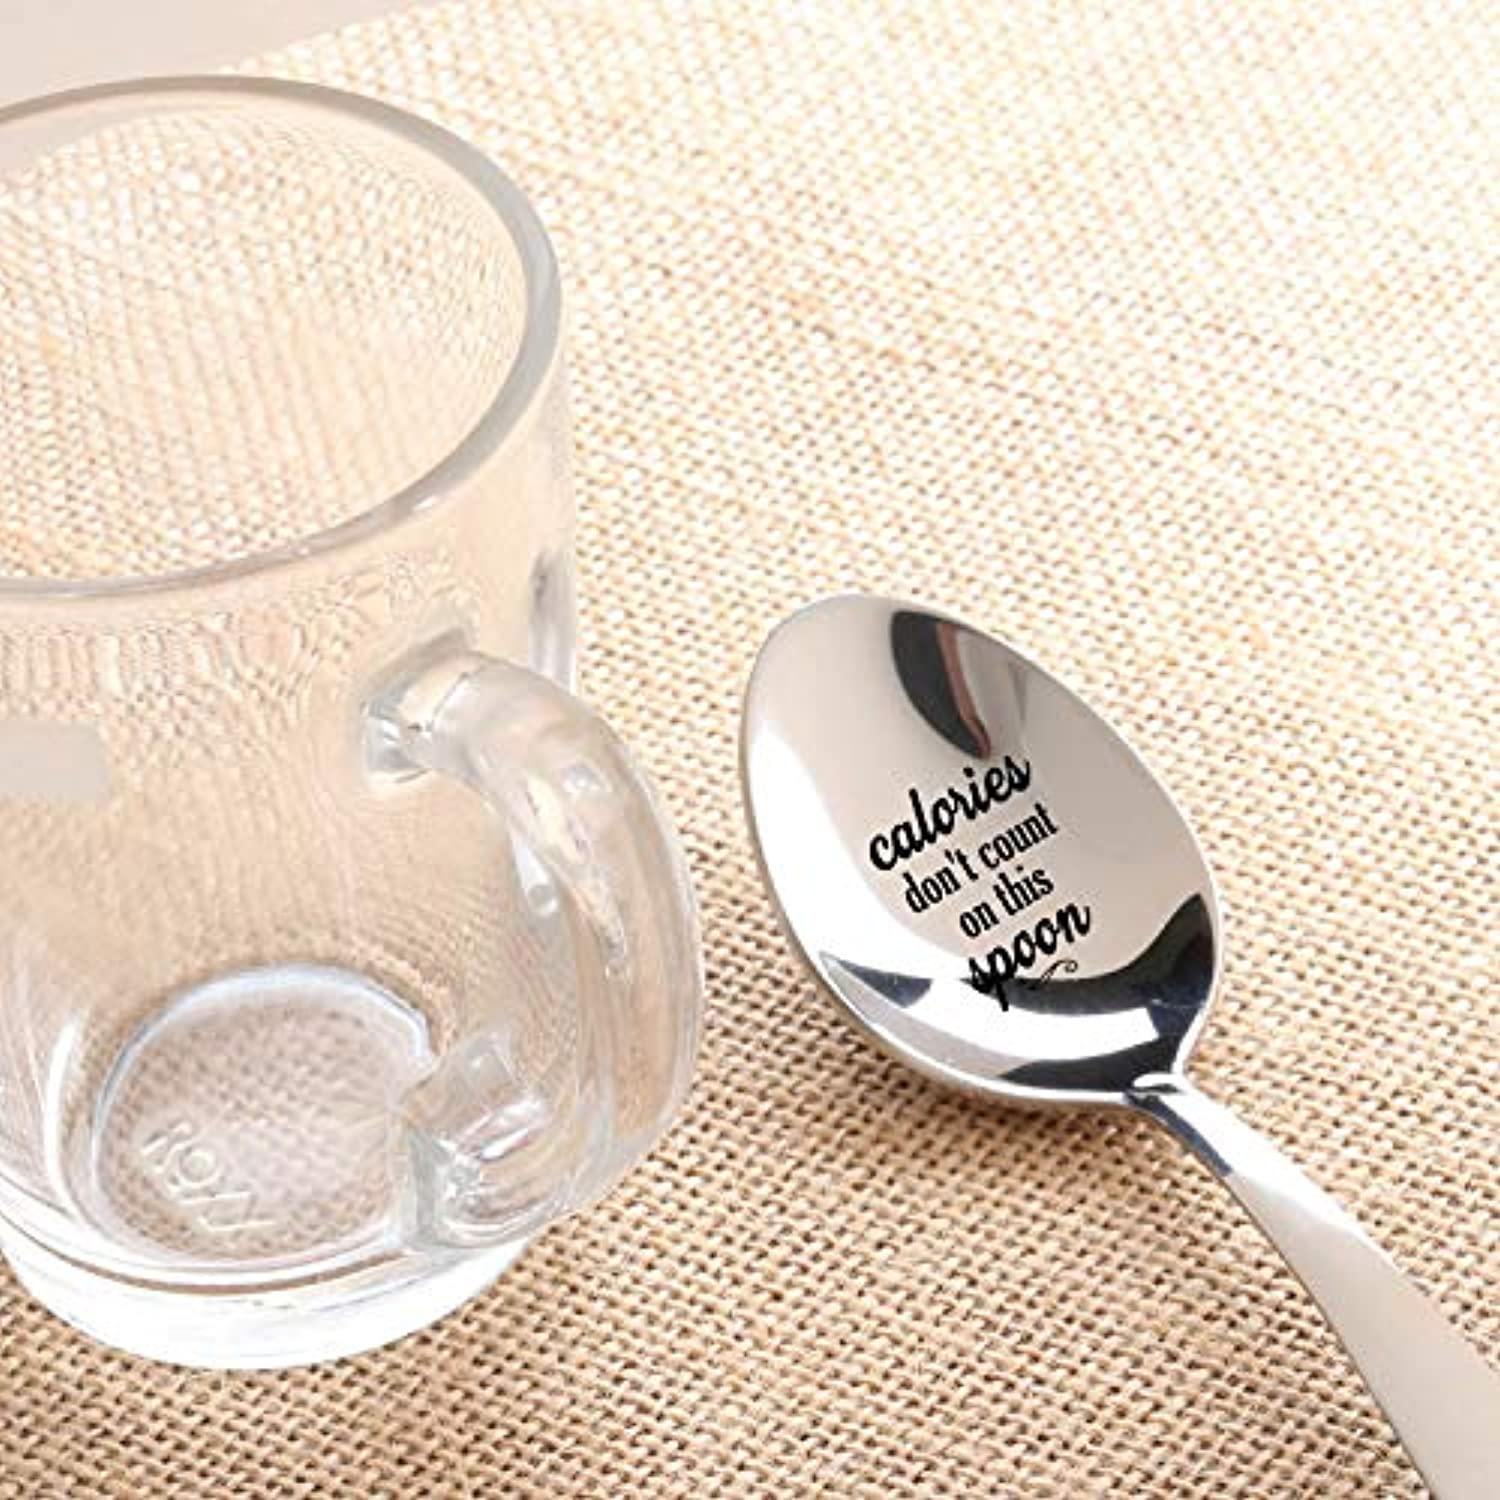 Engraved Spoon Gifts gifts for women - hilarious gag gifts - for her gifts  - christmas gift ideas - gifts under 20 dollars - gifts for men or women 